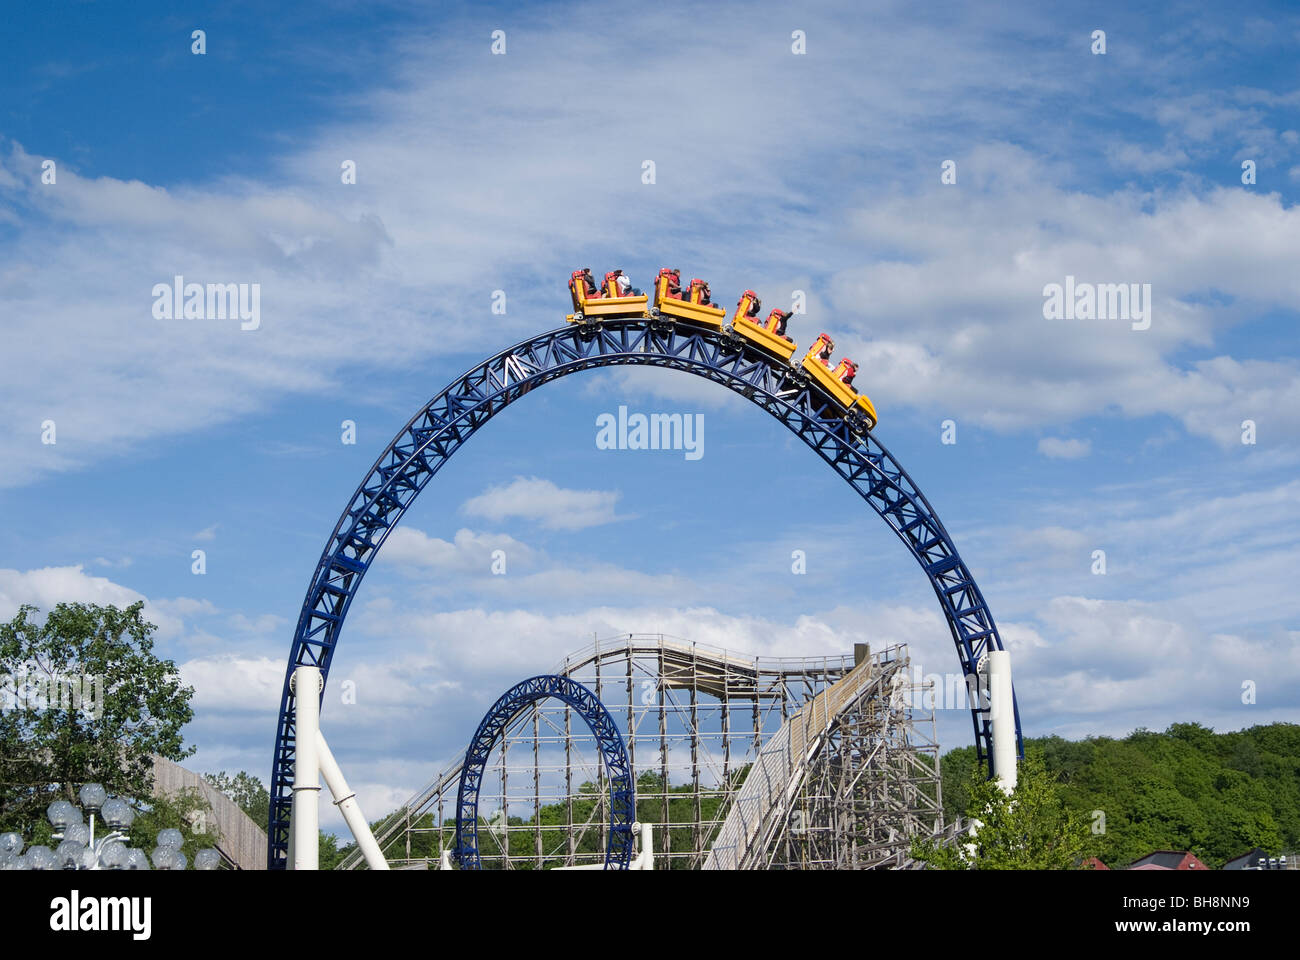 Metal rollercoaster with wooden rollercoaster seen through the loop, at the Liseberg amusement park in Göteborg (Gothenberg) Stock Photo